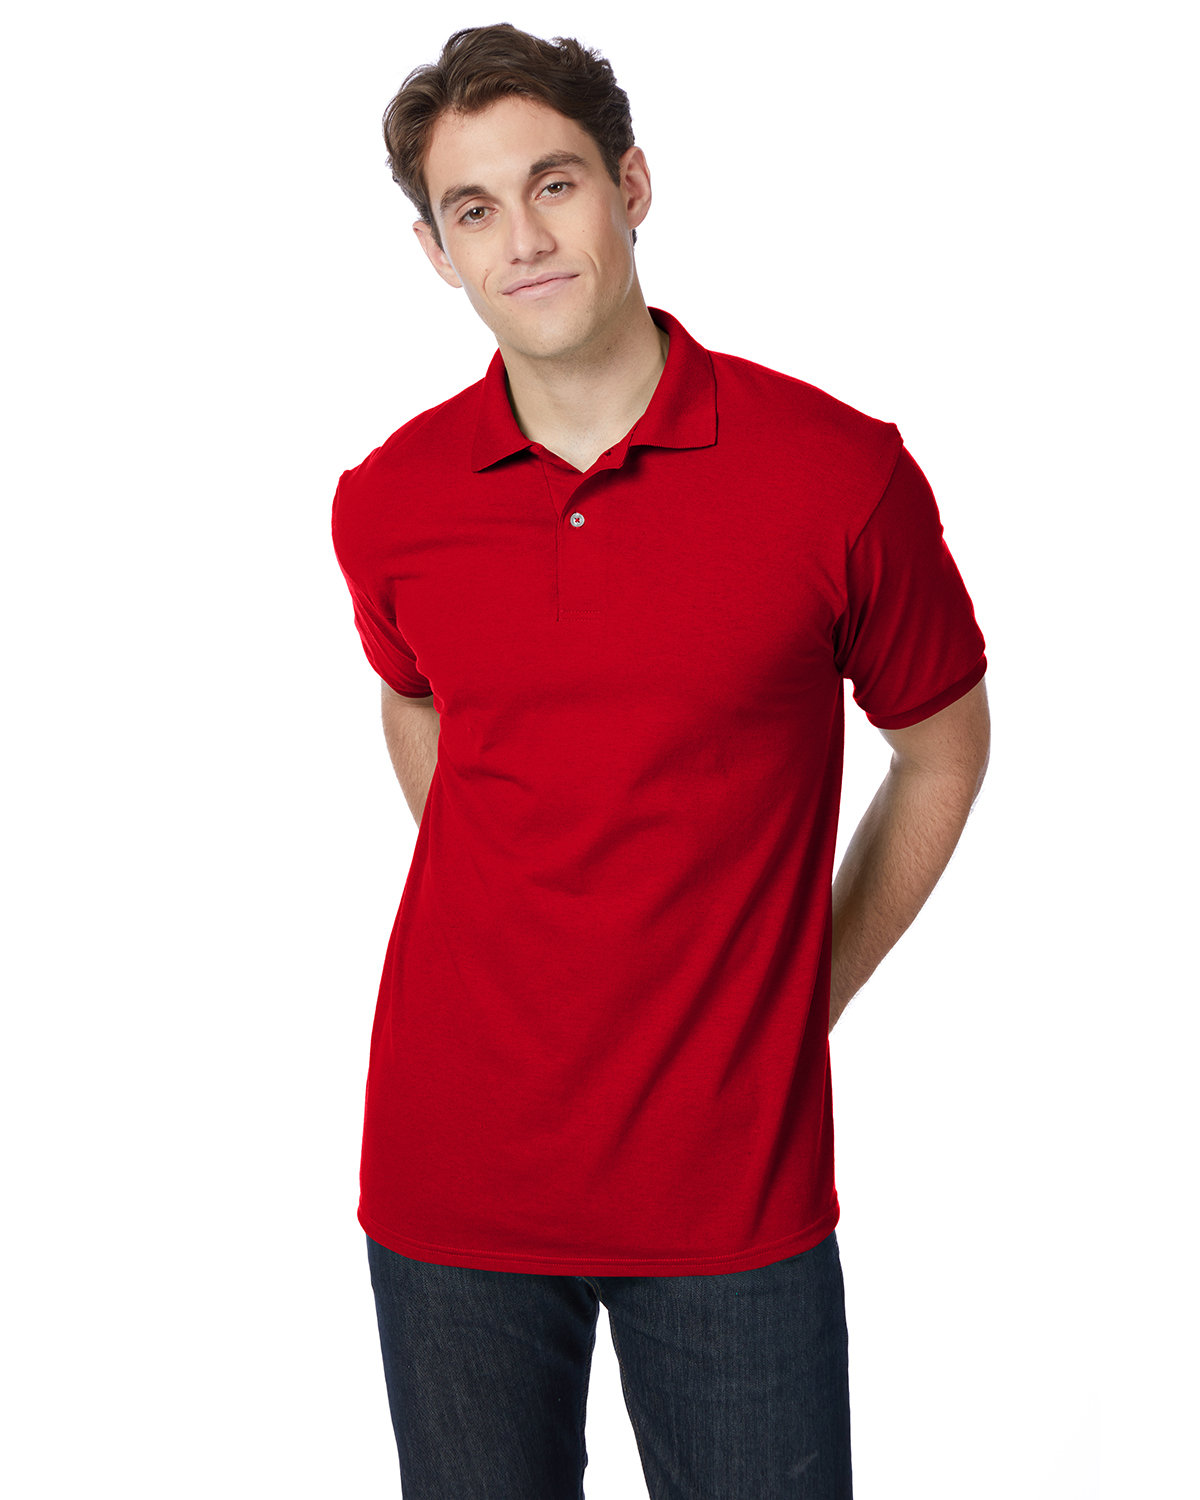 Hanes Adult 50/50 EcoSmart® Jersey Knit Polo DEEP RED 